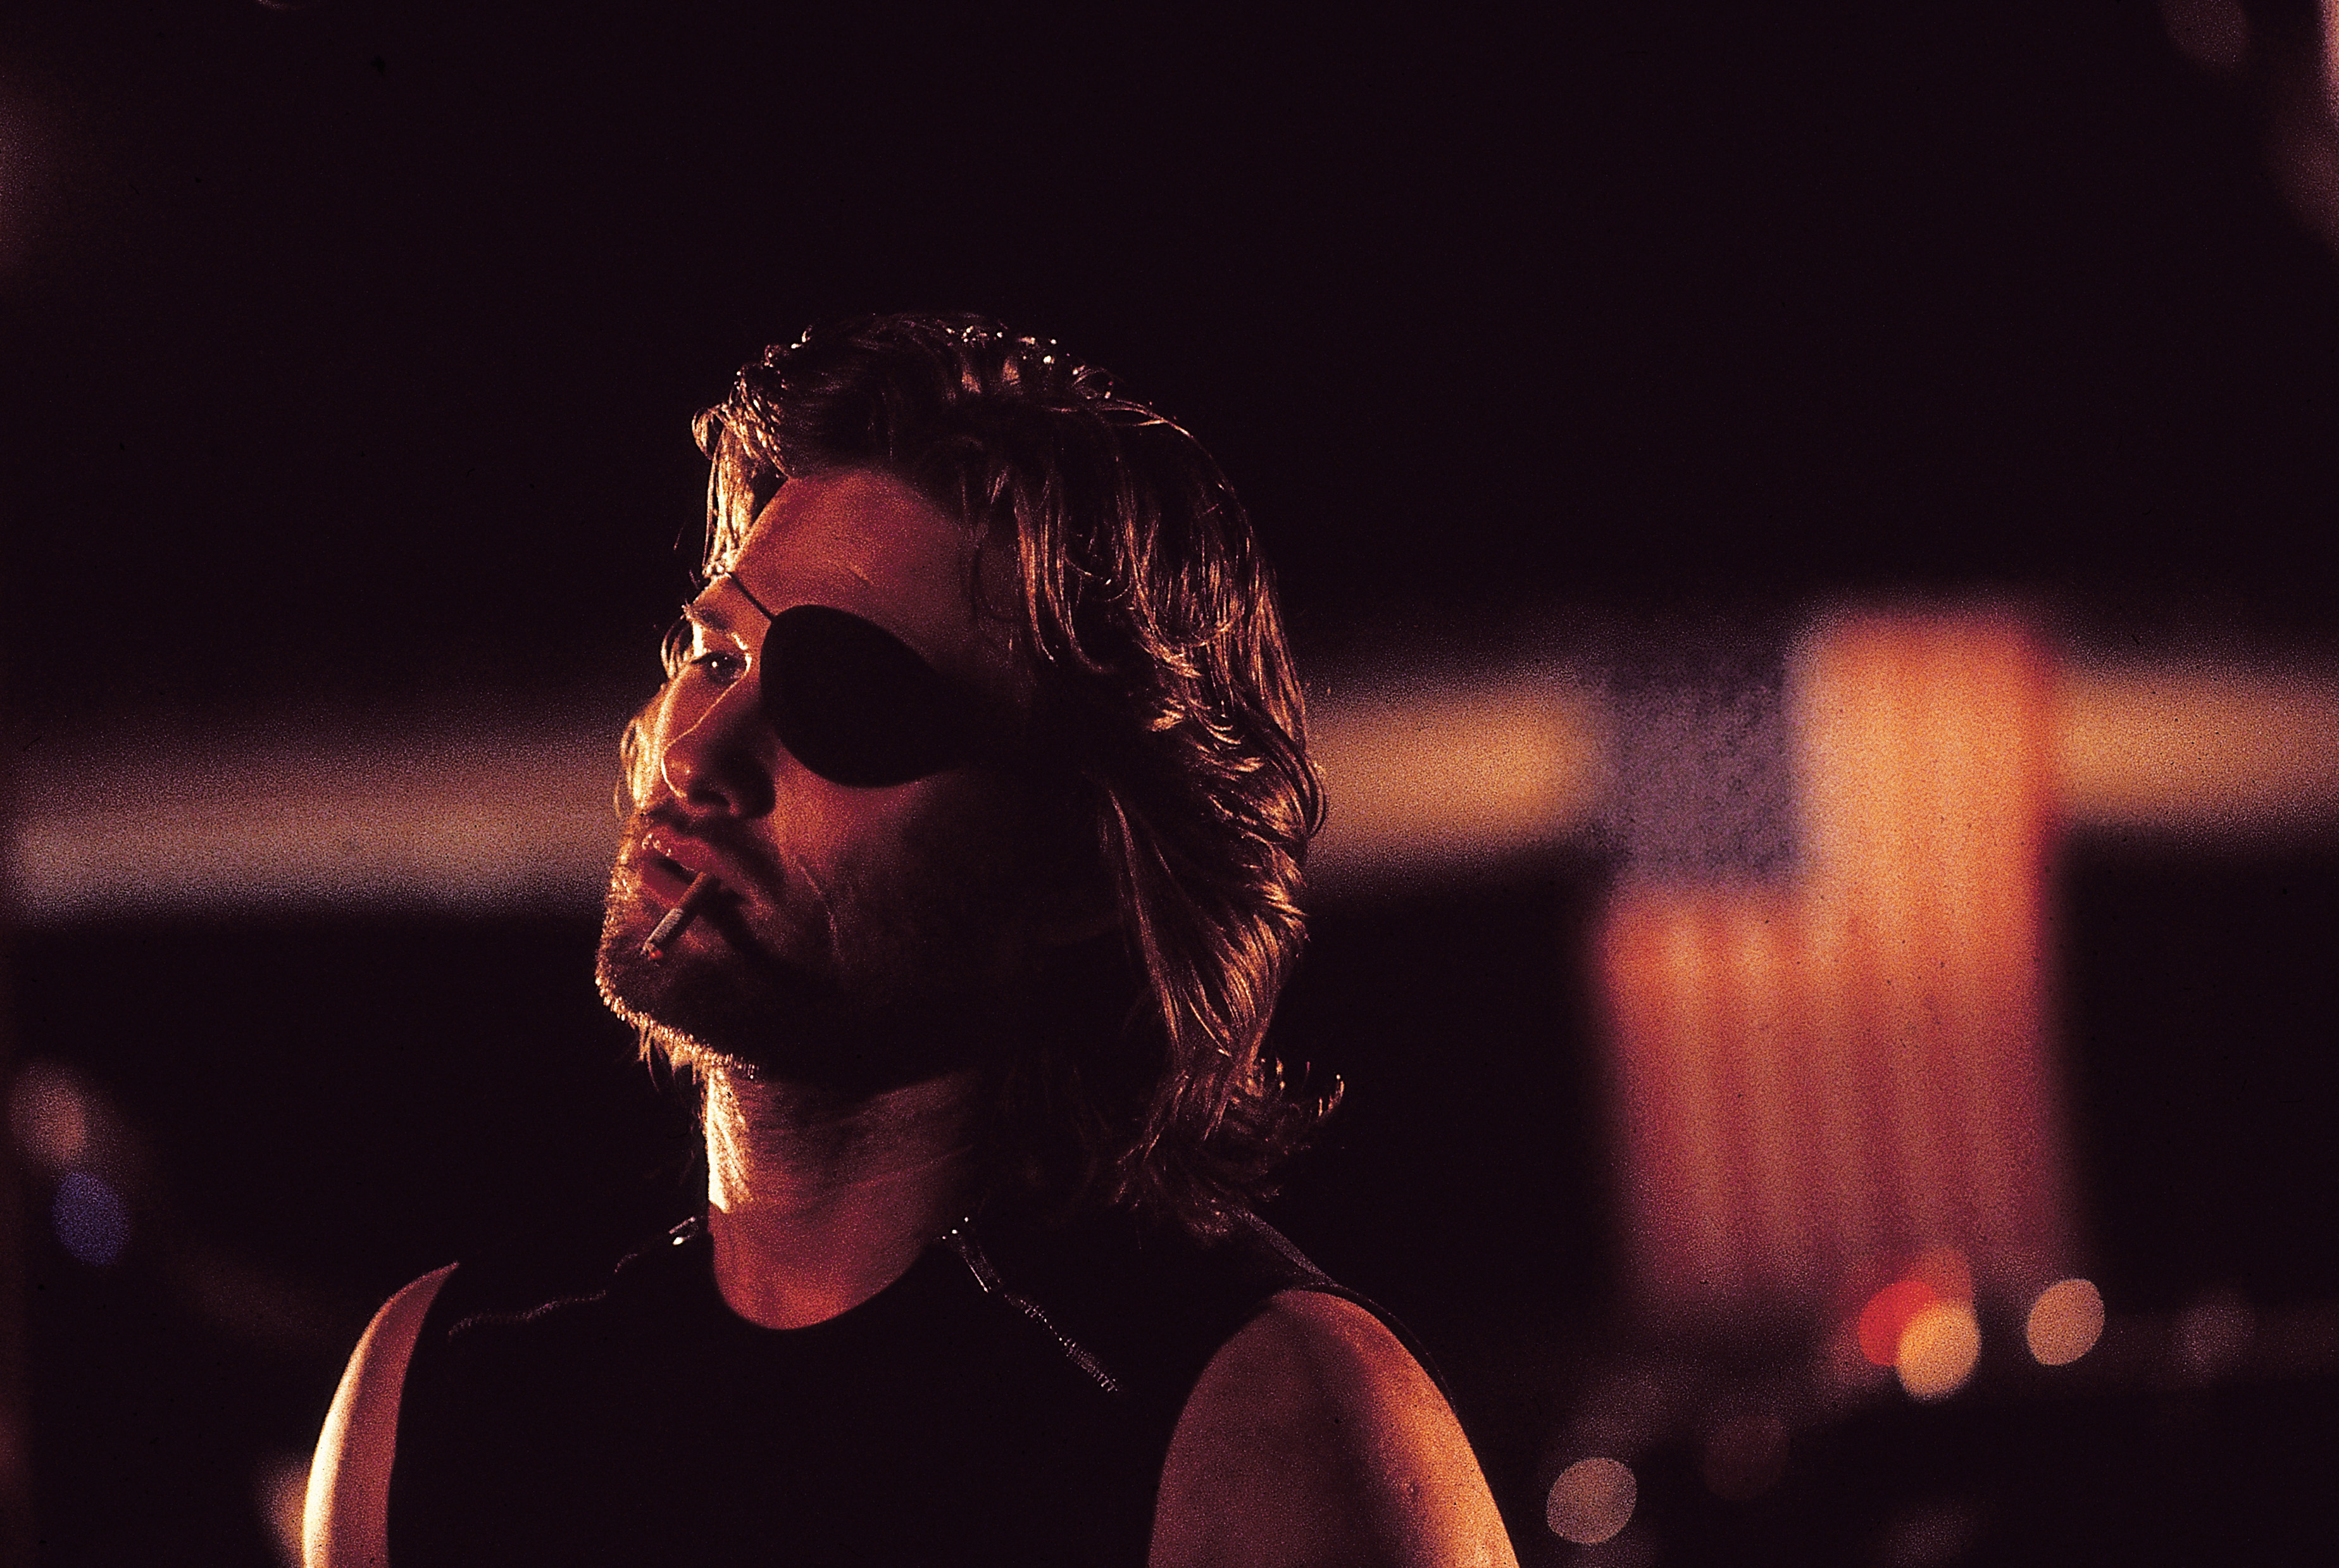 Kurt Russell in Escape from New York (1981)